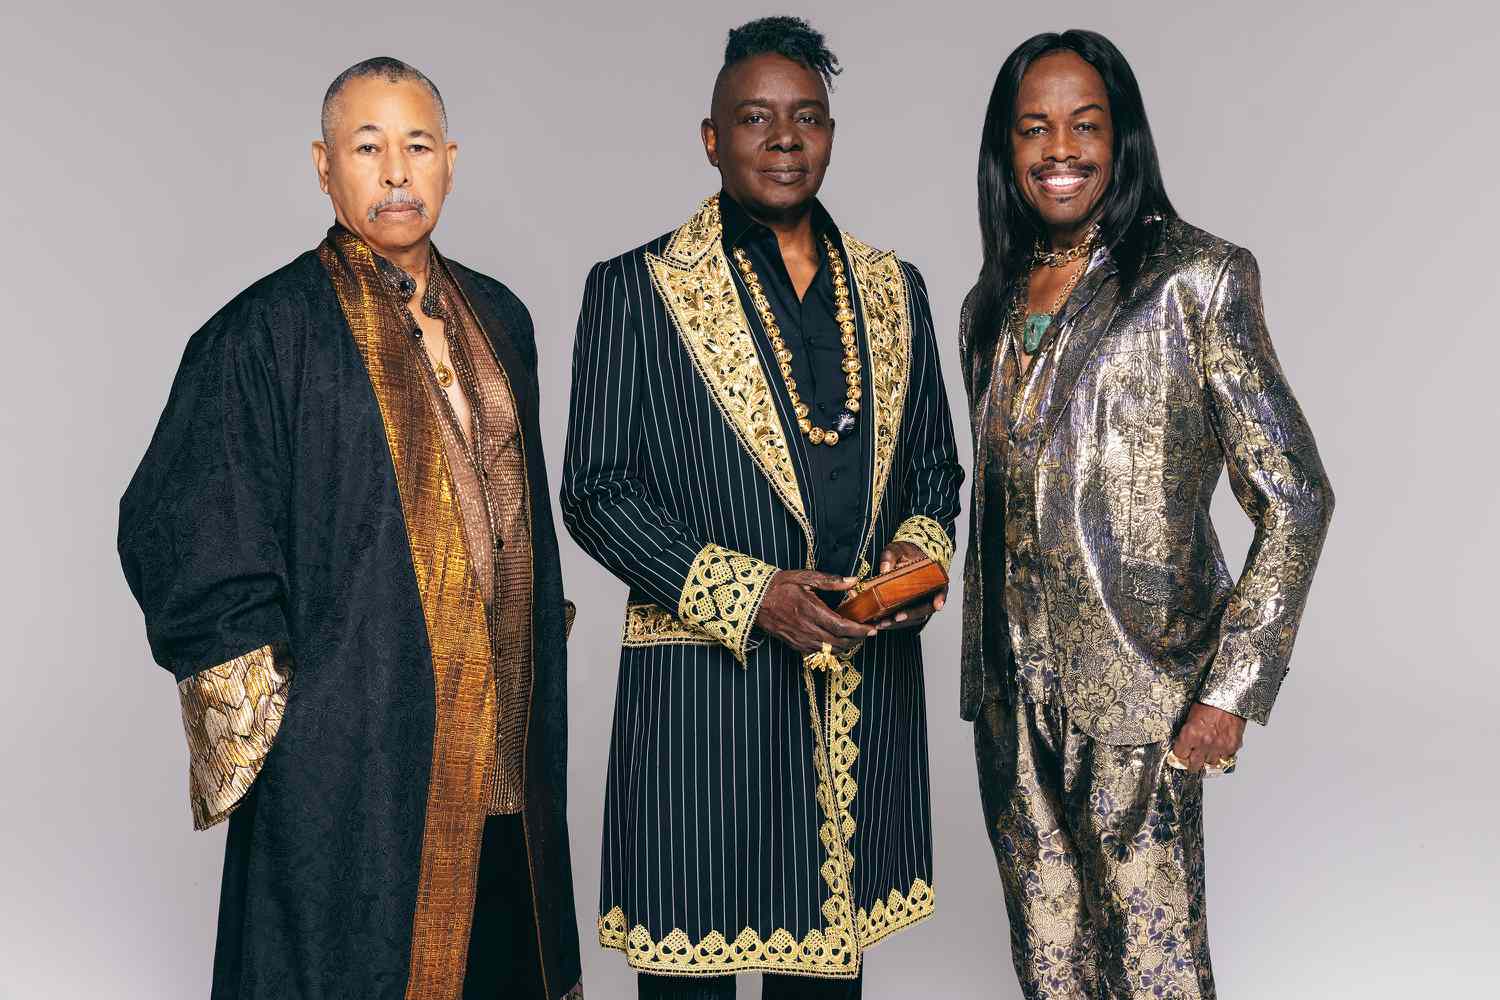 earth, wind and fire